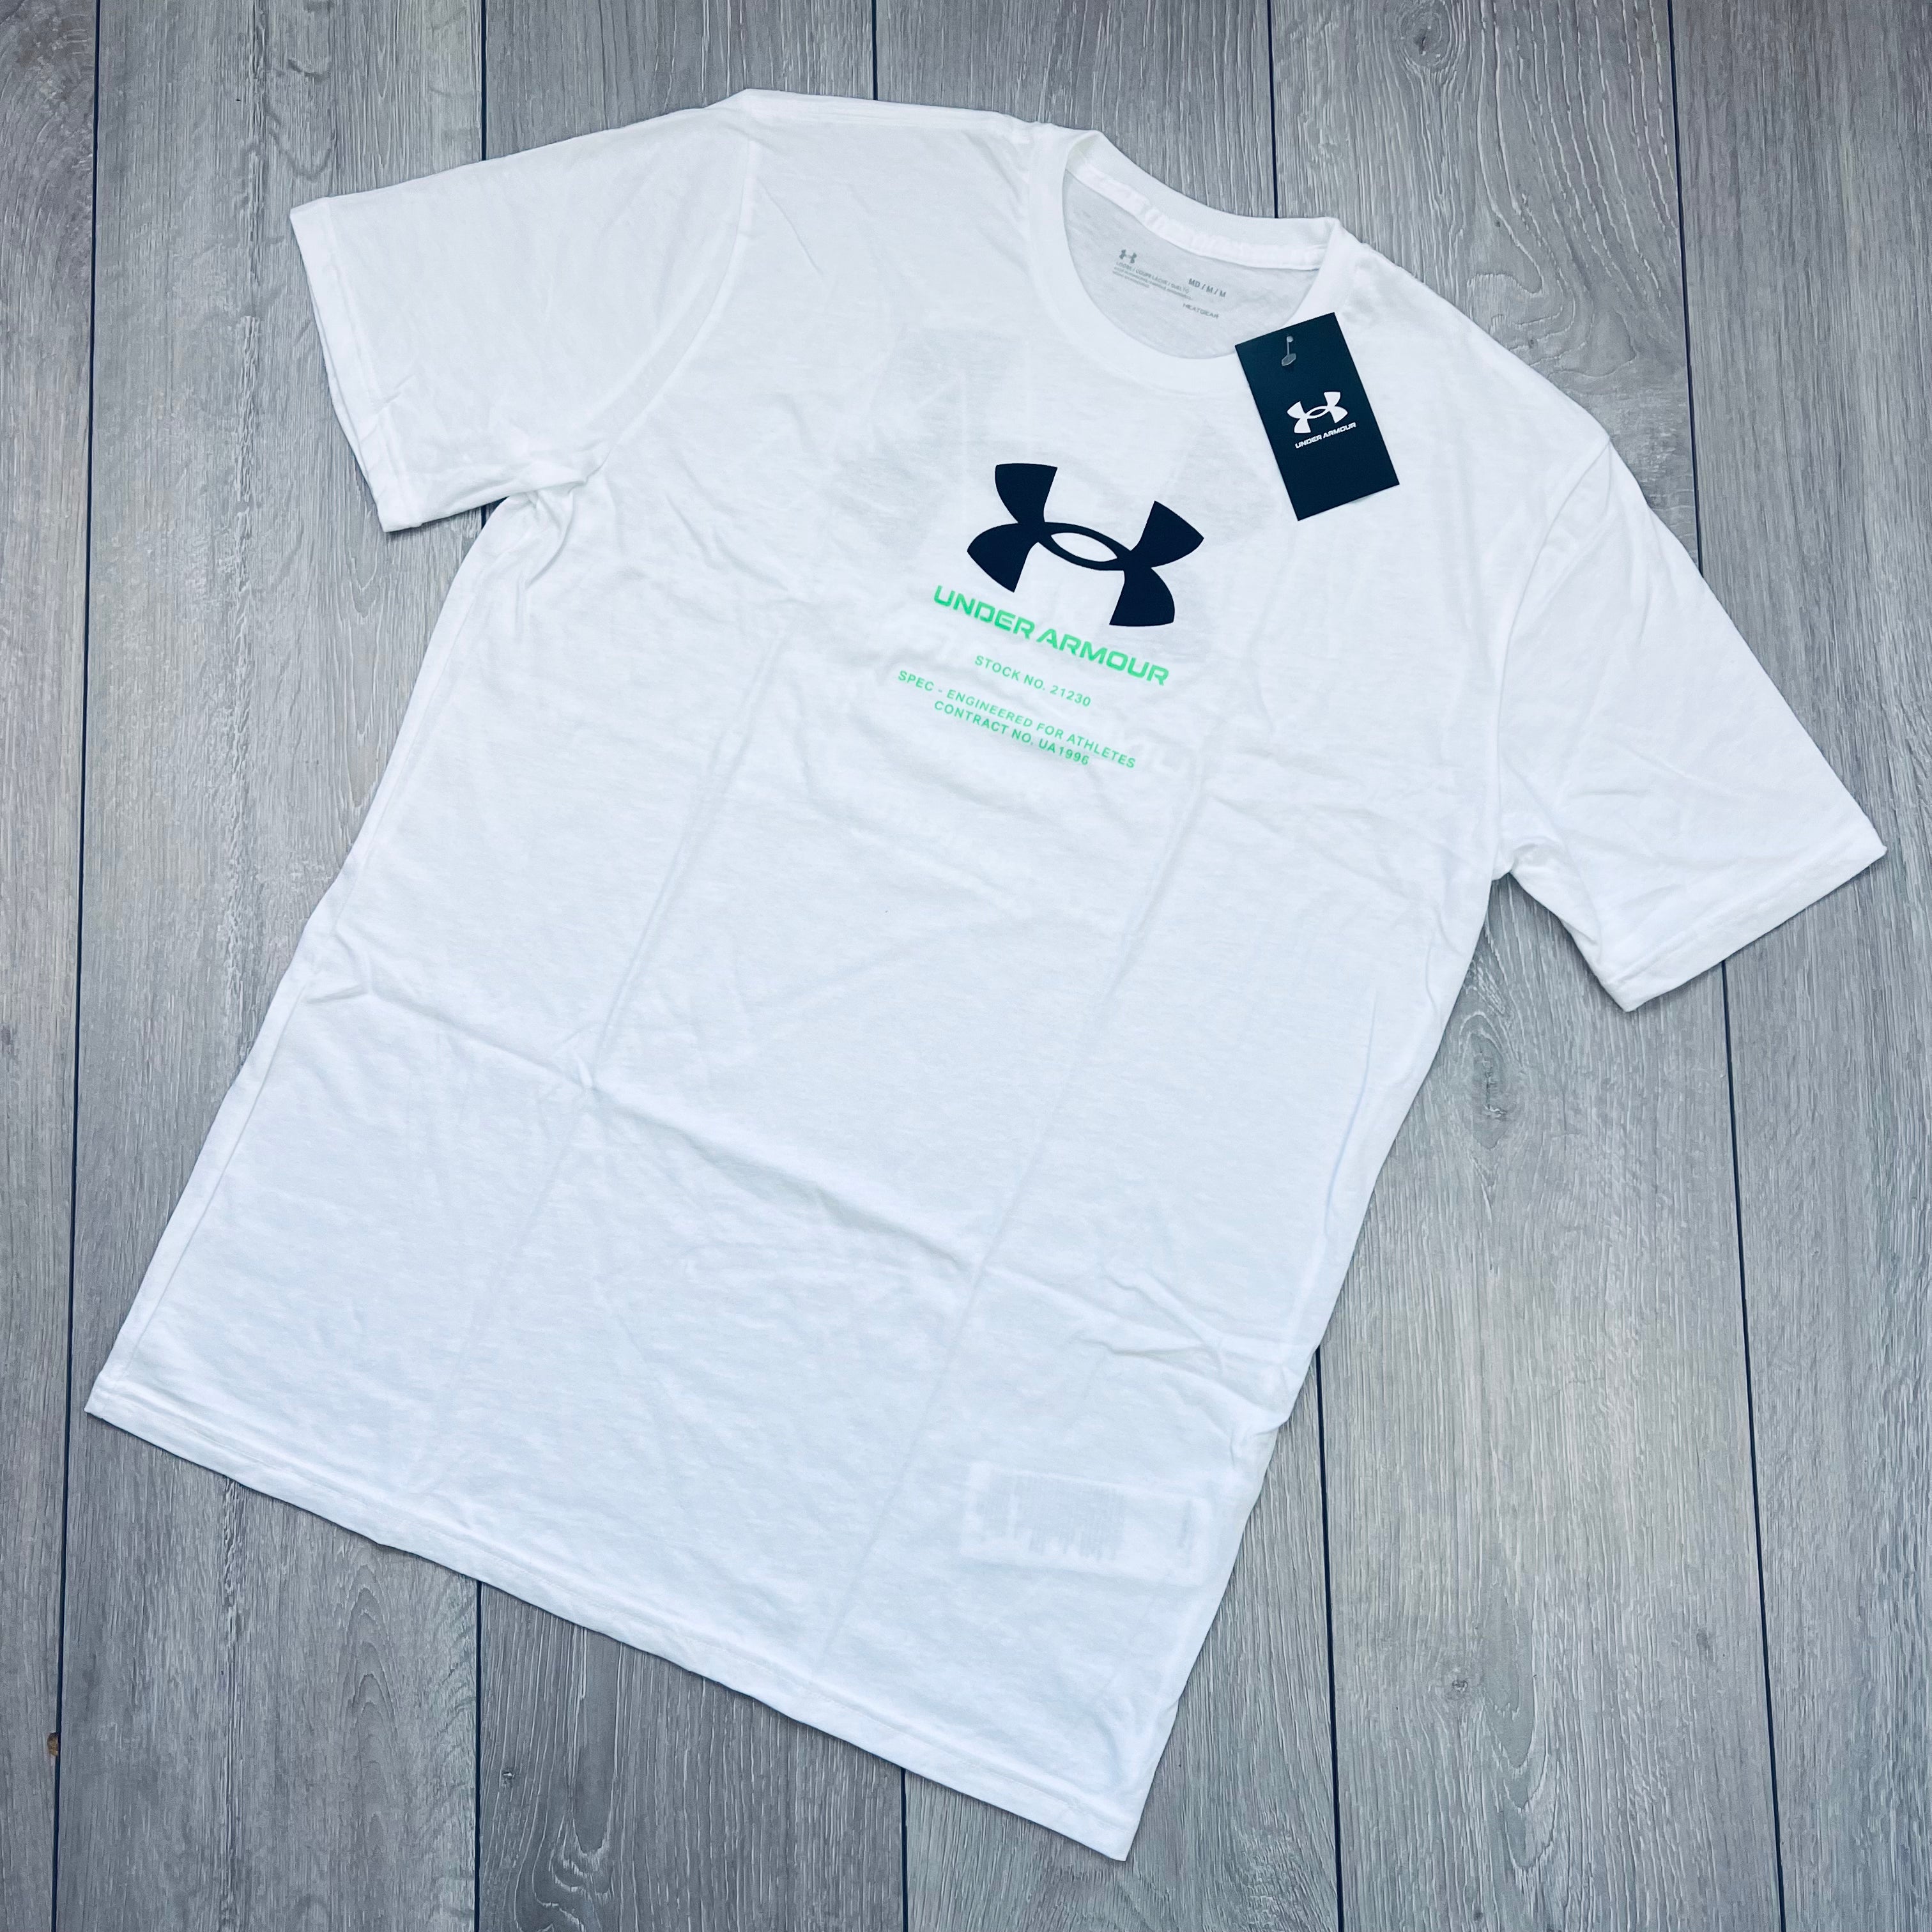 Under Armour T-Shirt - White